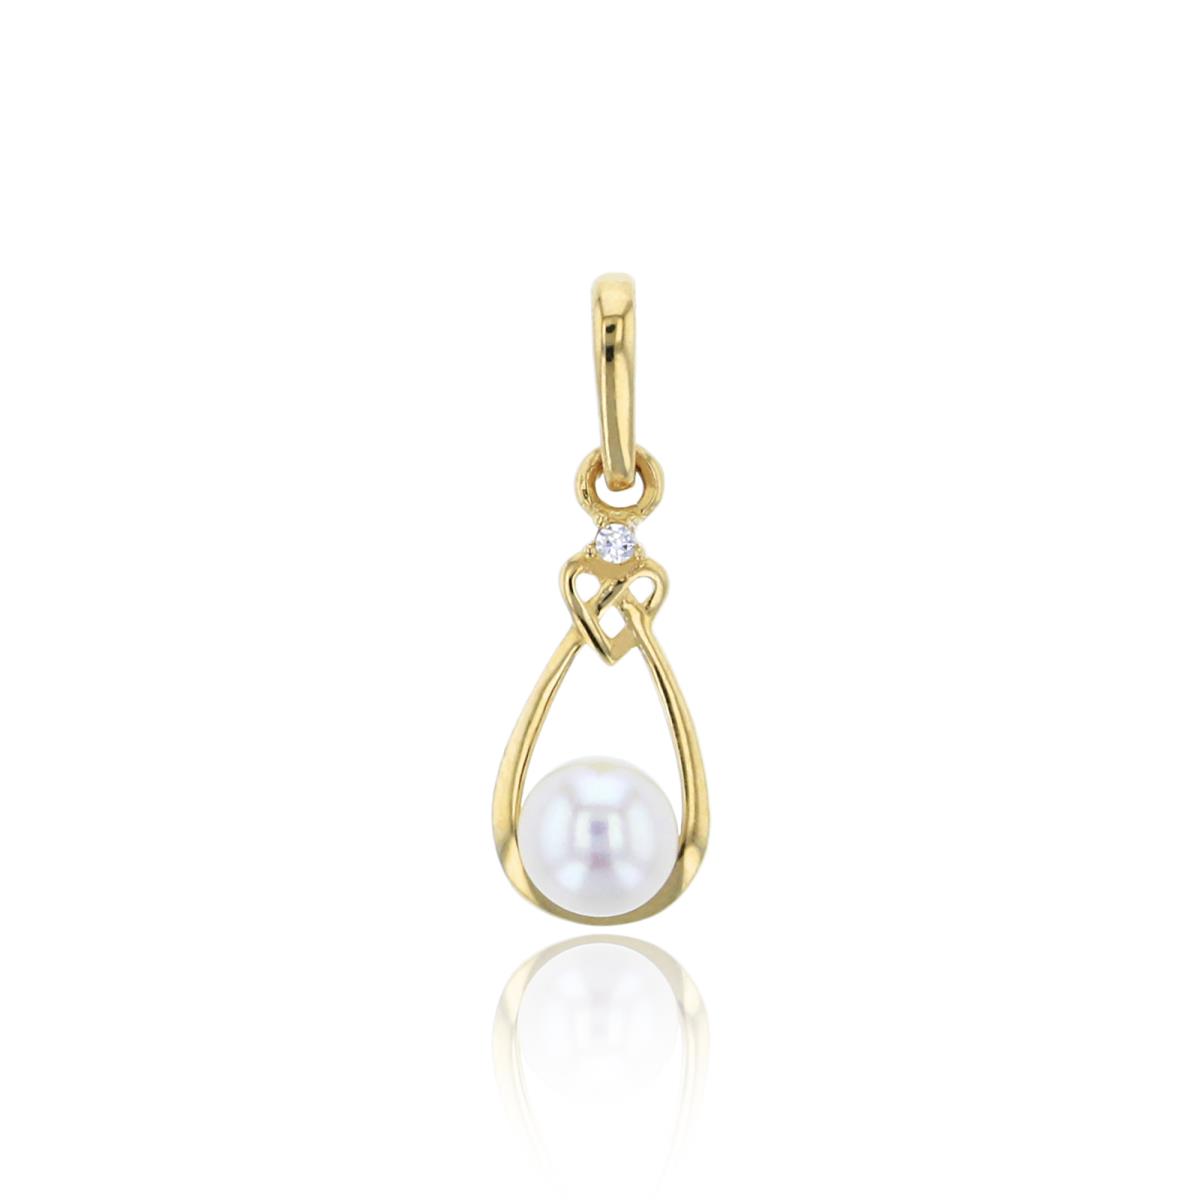 10K Yellow Gold Polished Open Pear Shape with 4mm Fresh Water Pearl & CZ Pendant